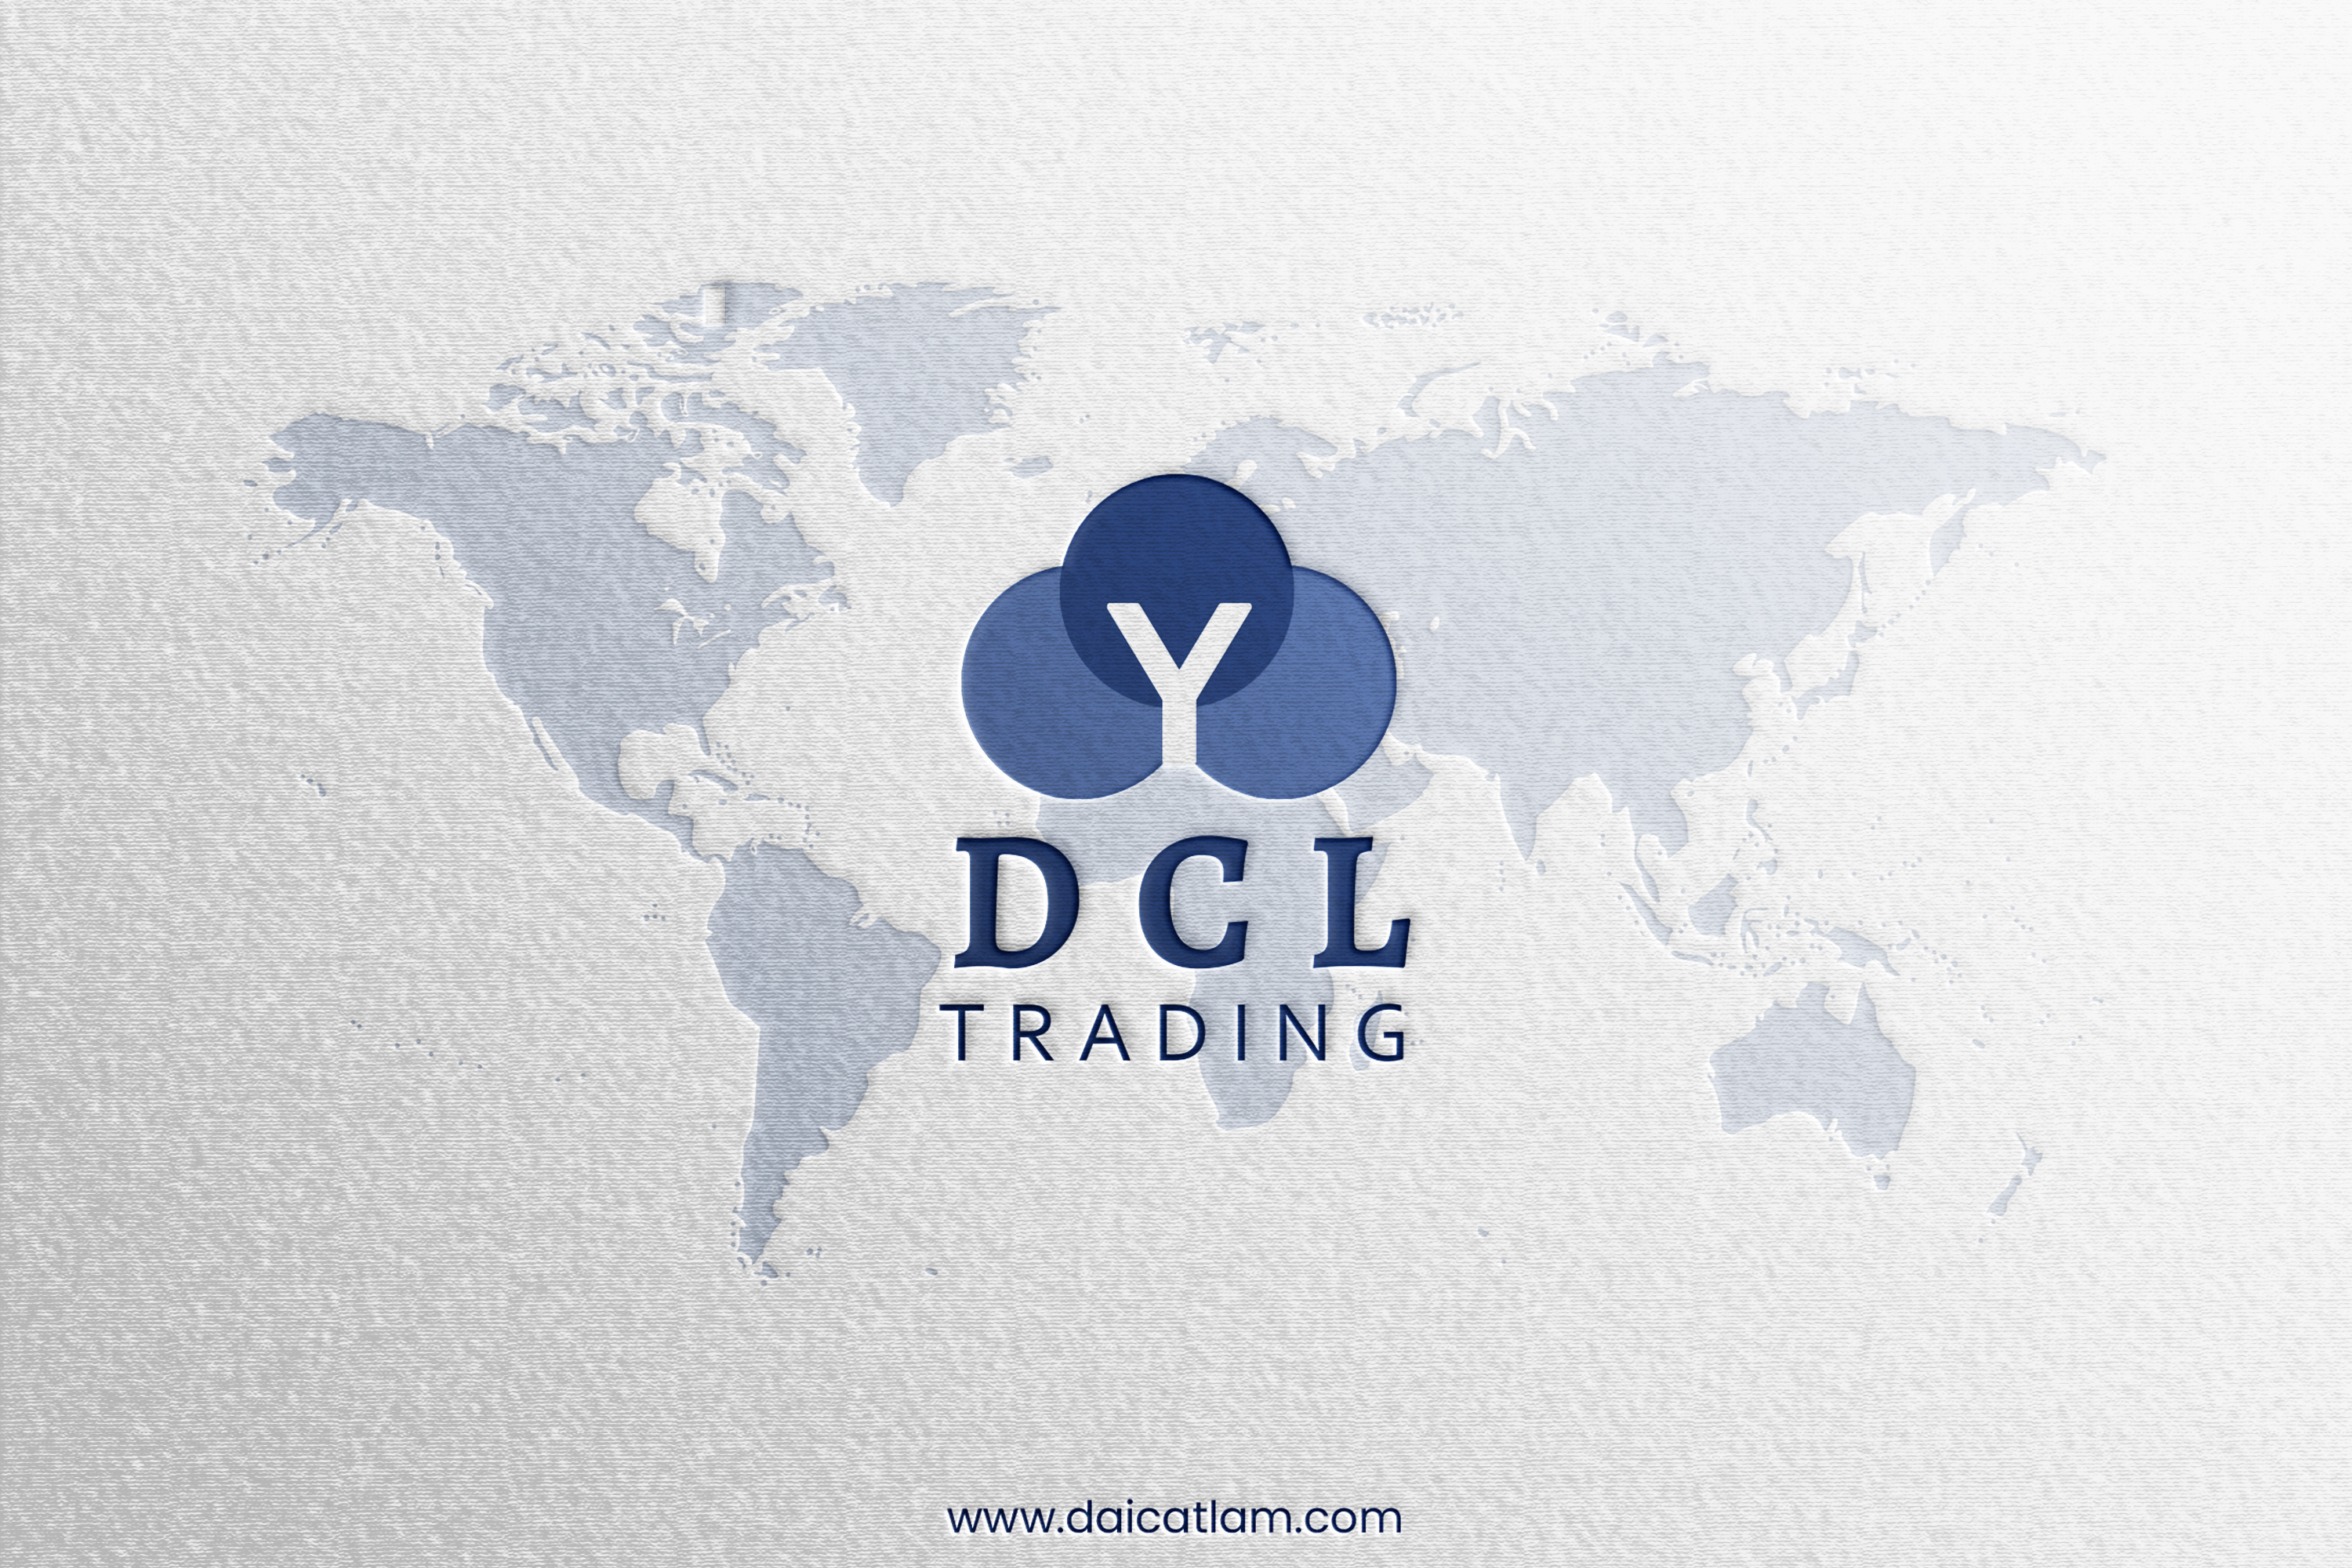 DCL TRADING